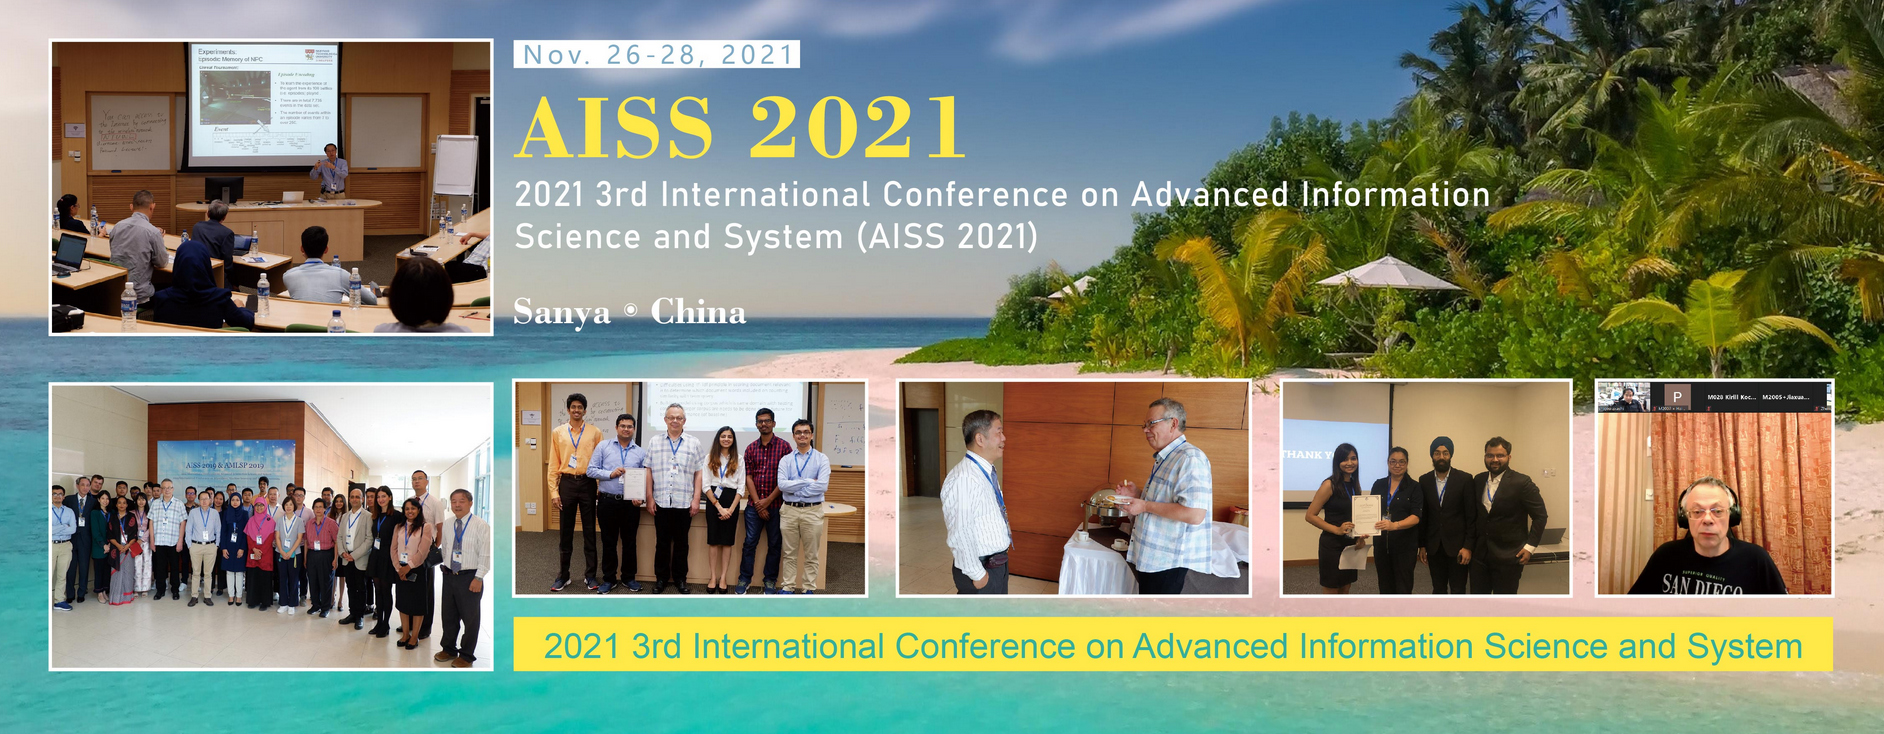 2021 3rd International Conference on Advanced Information Science and System (AISS 2021), Sanya, Hainan, China